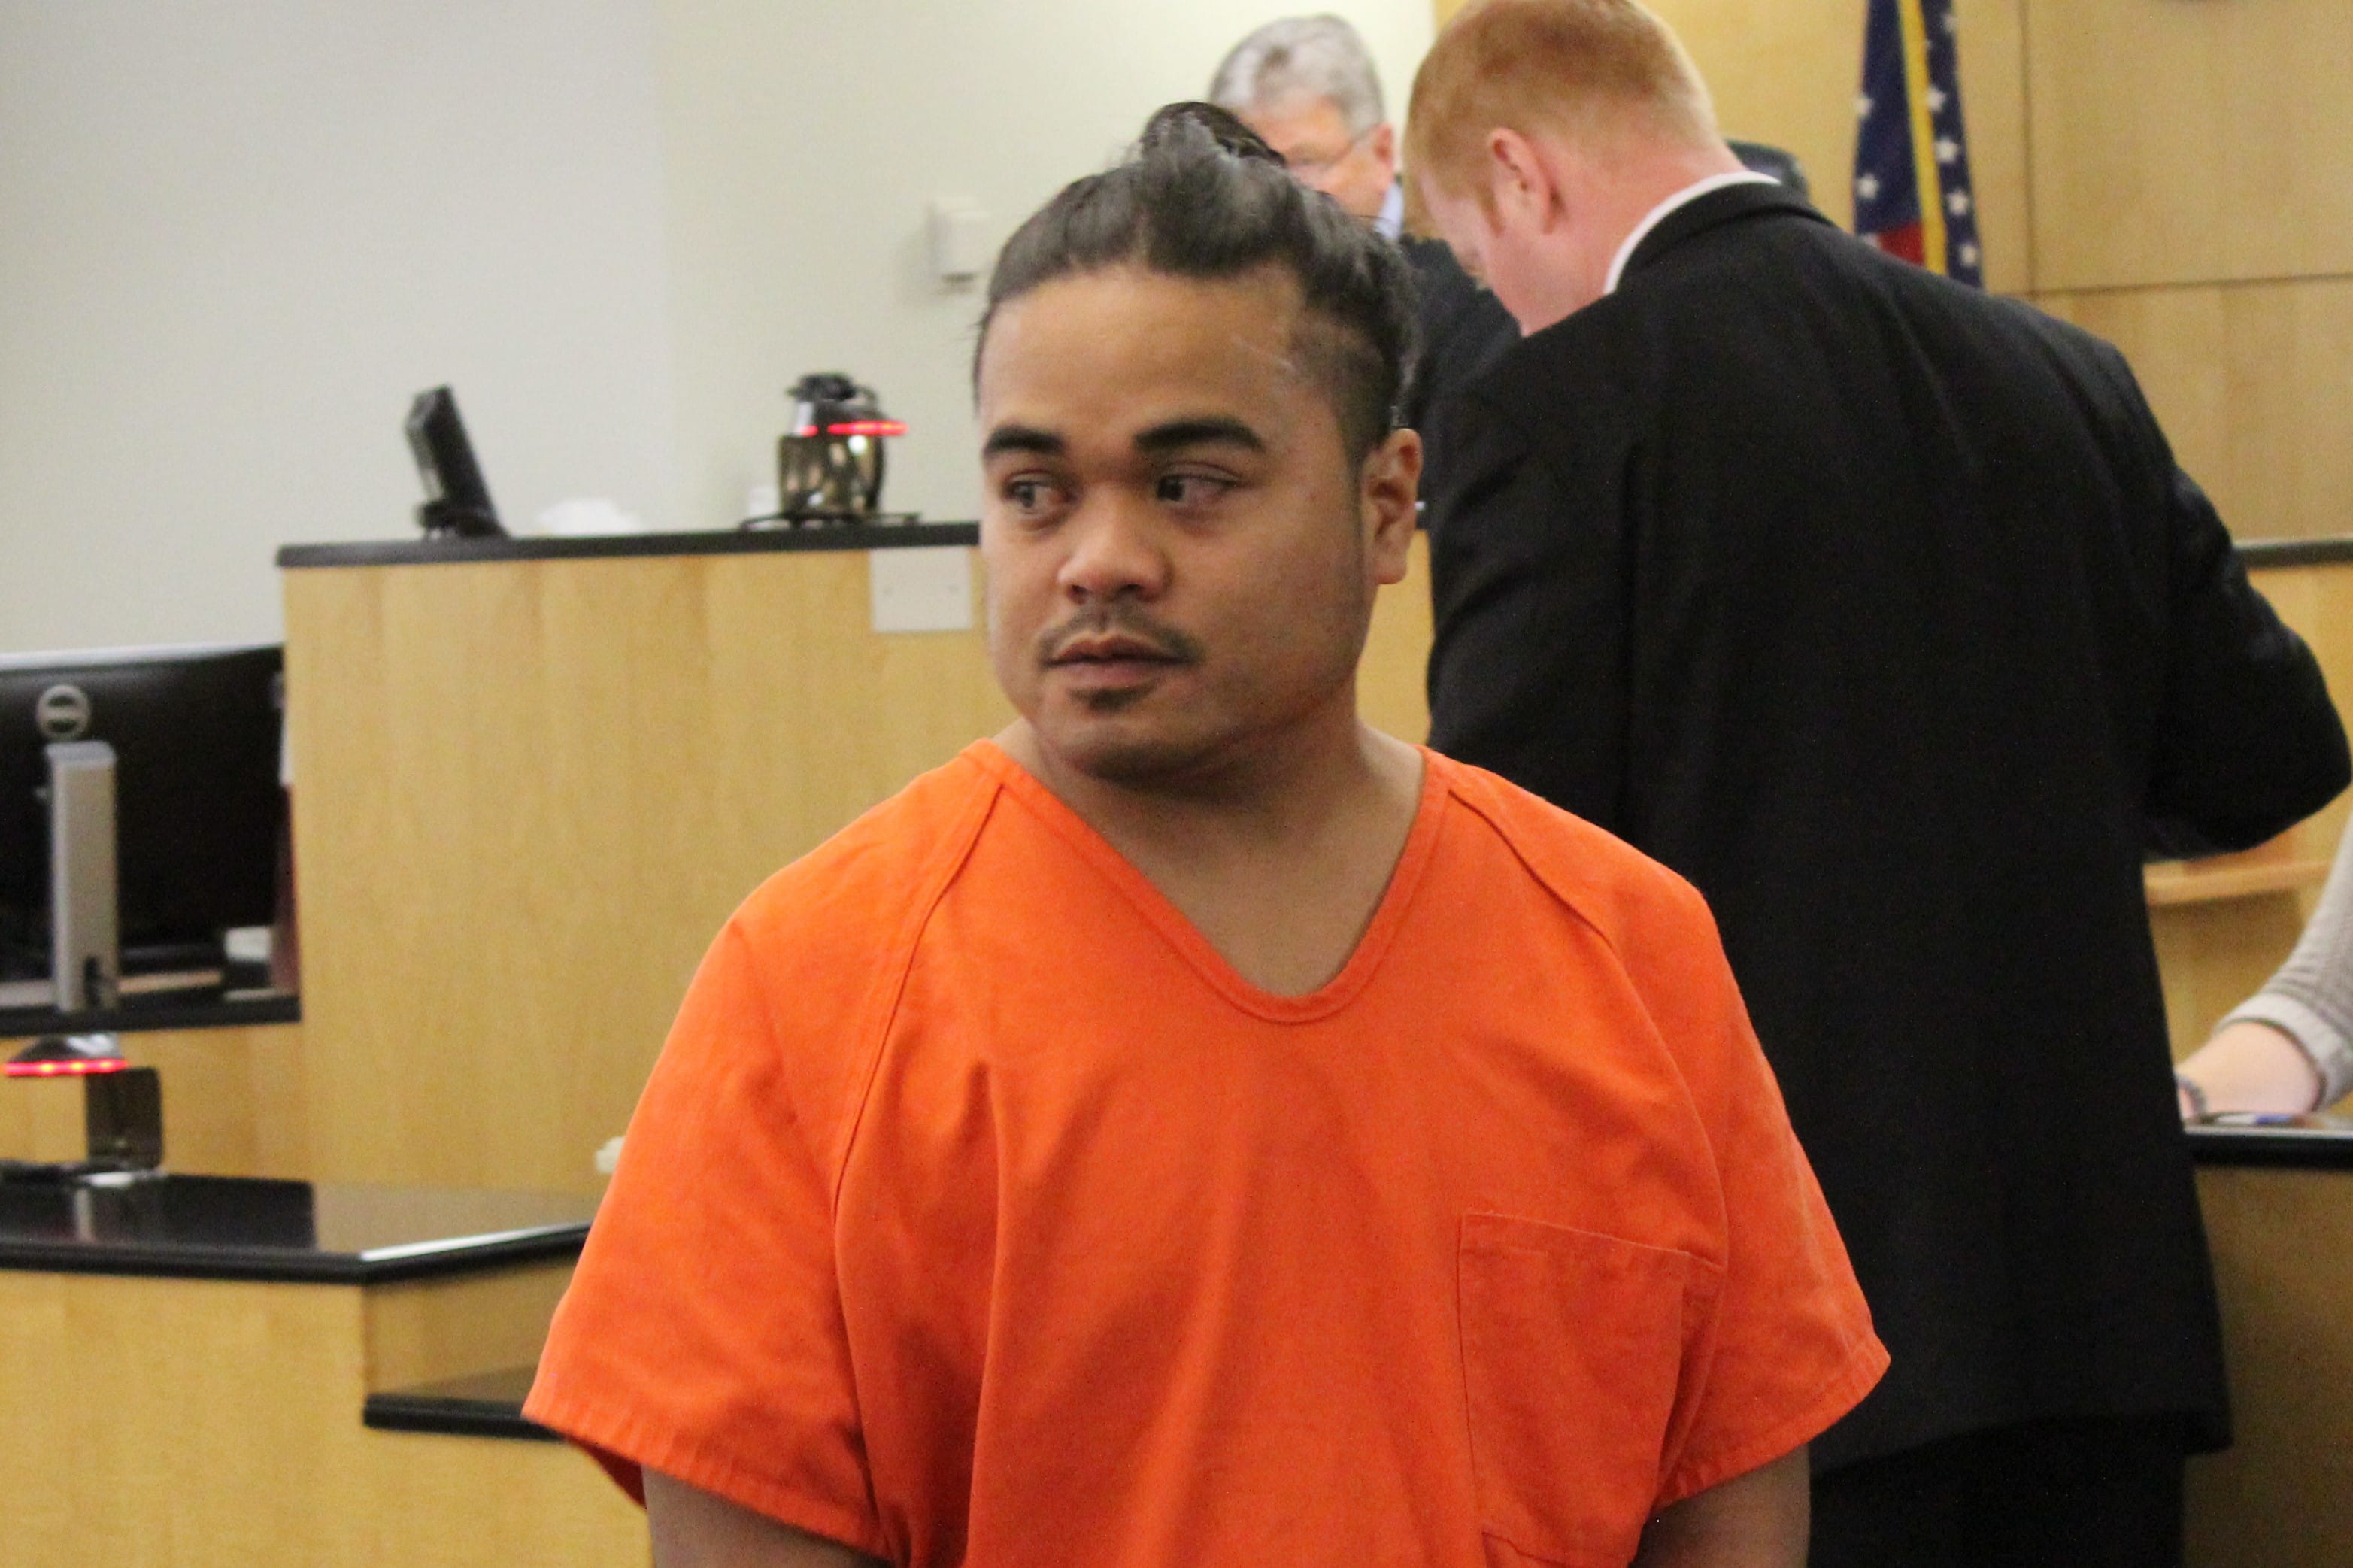 Michael Tataichy, 29, appeared Monday, Aug. 12, 2019, in Clark County Superior Court on suspicion of vehicular homicide. The allegation stems from a single-vehicle crash in Camas in February that killed an 18-year-old.